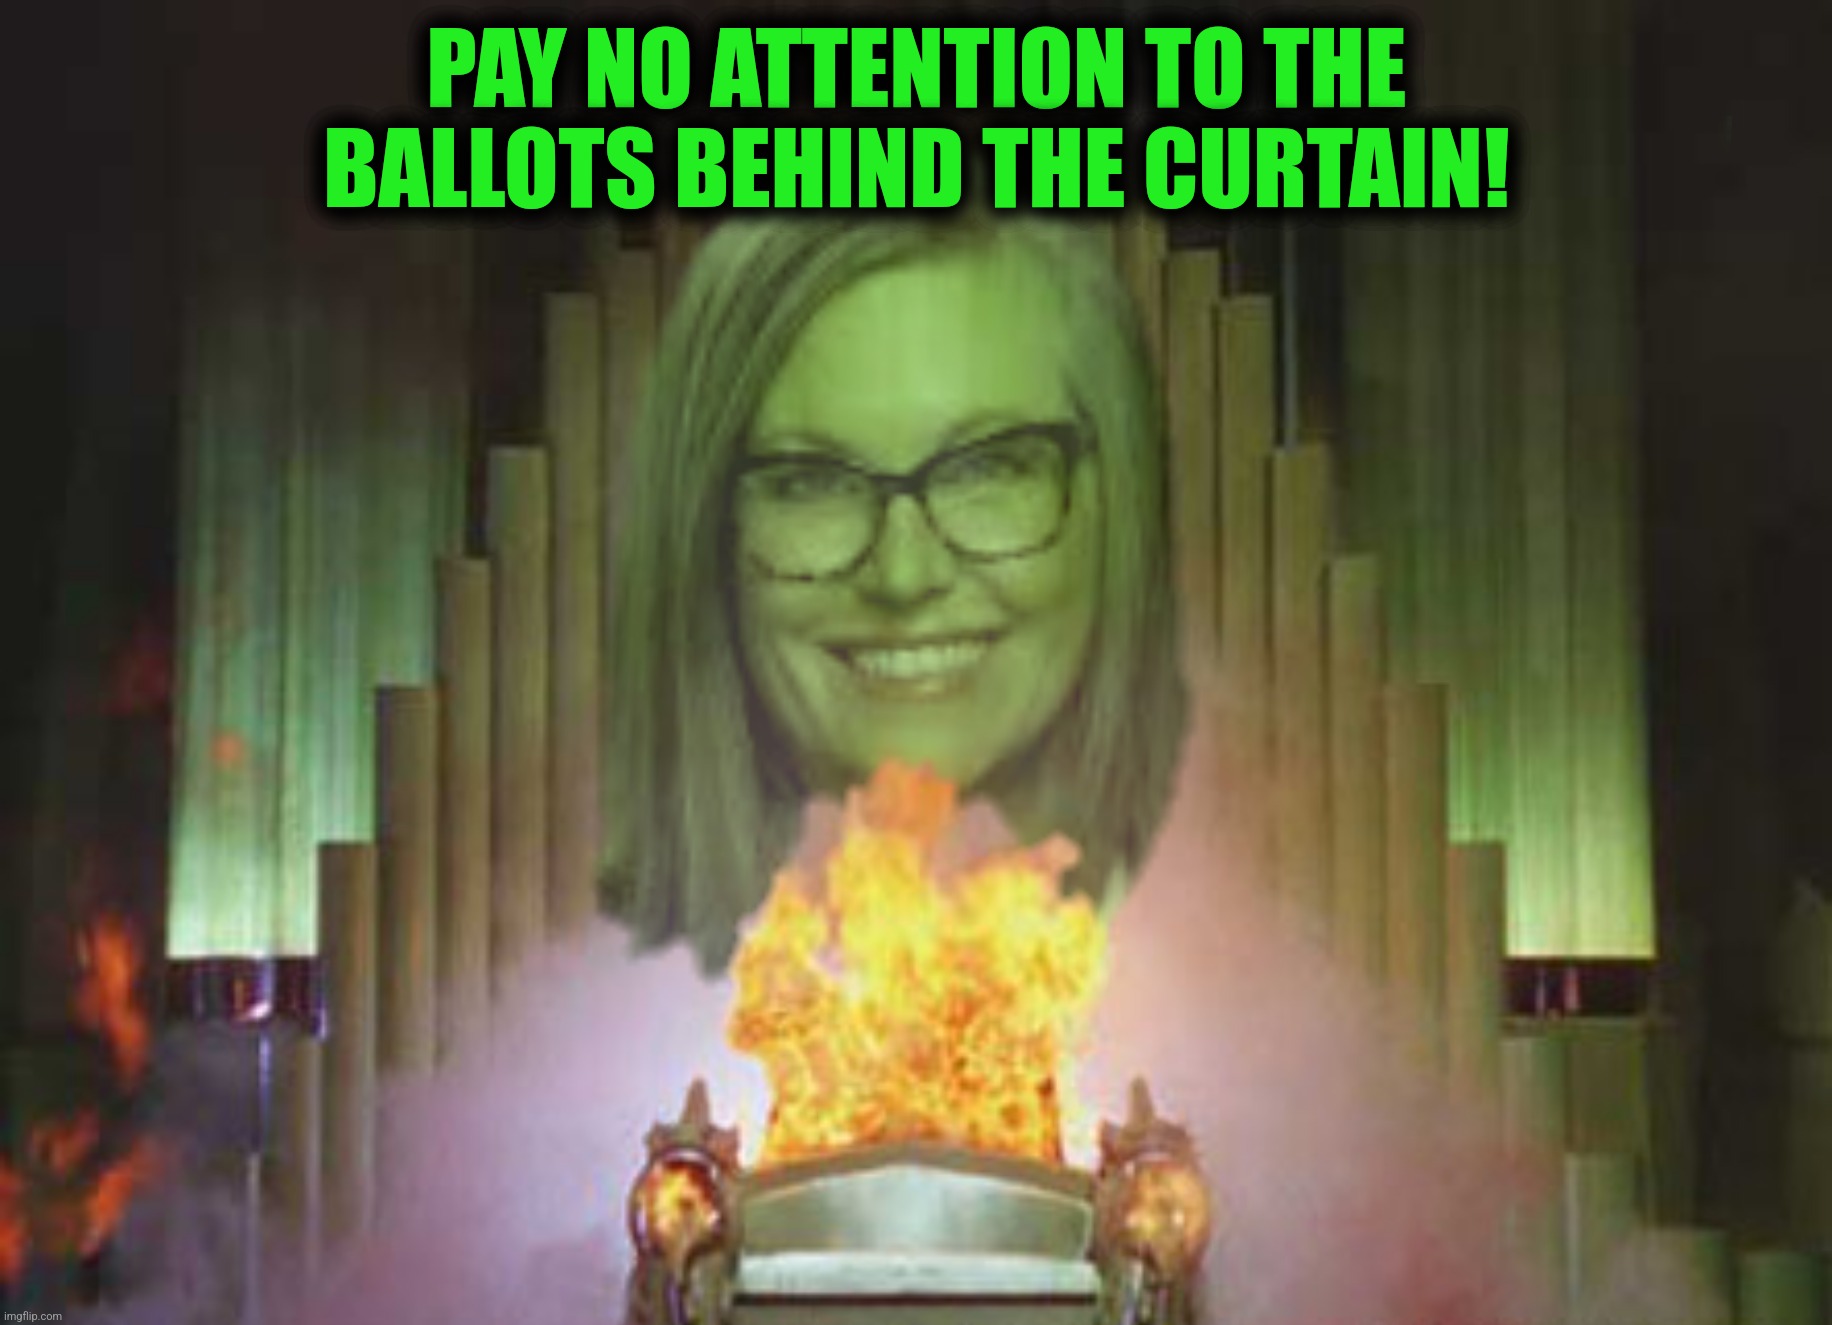 PAY NO ATTENTION TO THE BALLOTS BEHIND THE CURTAIN! | made w/ Imgflip meme maker